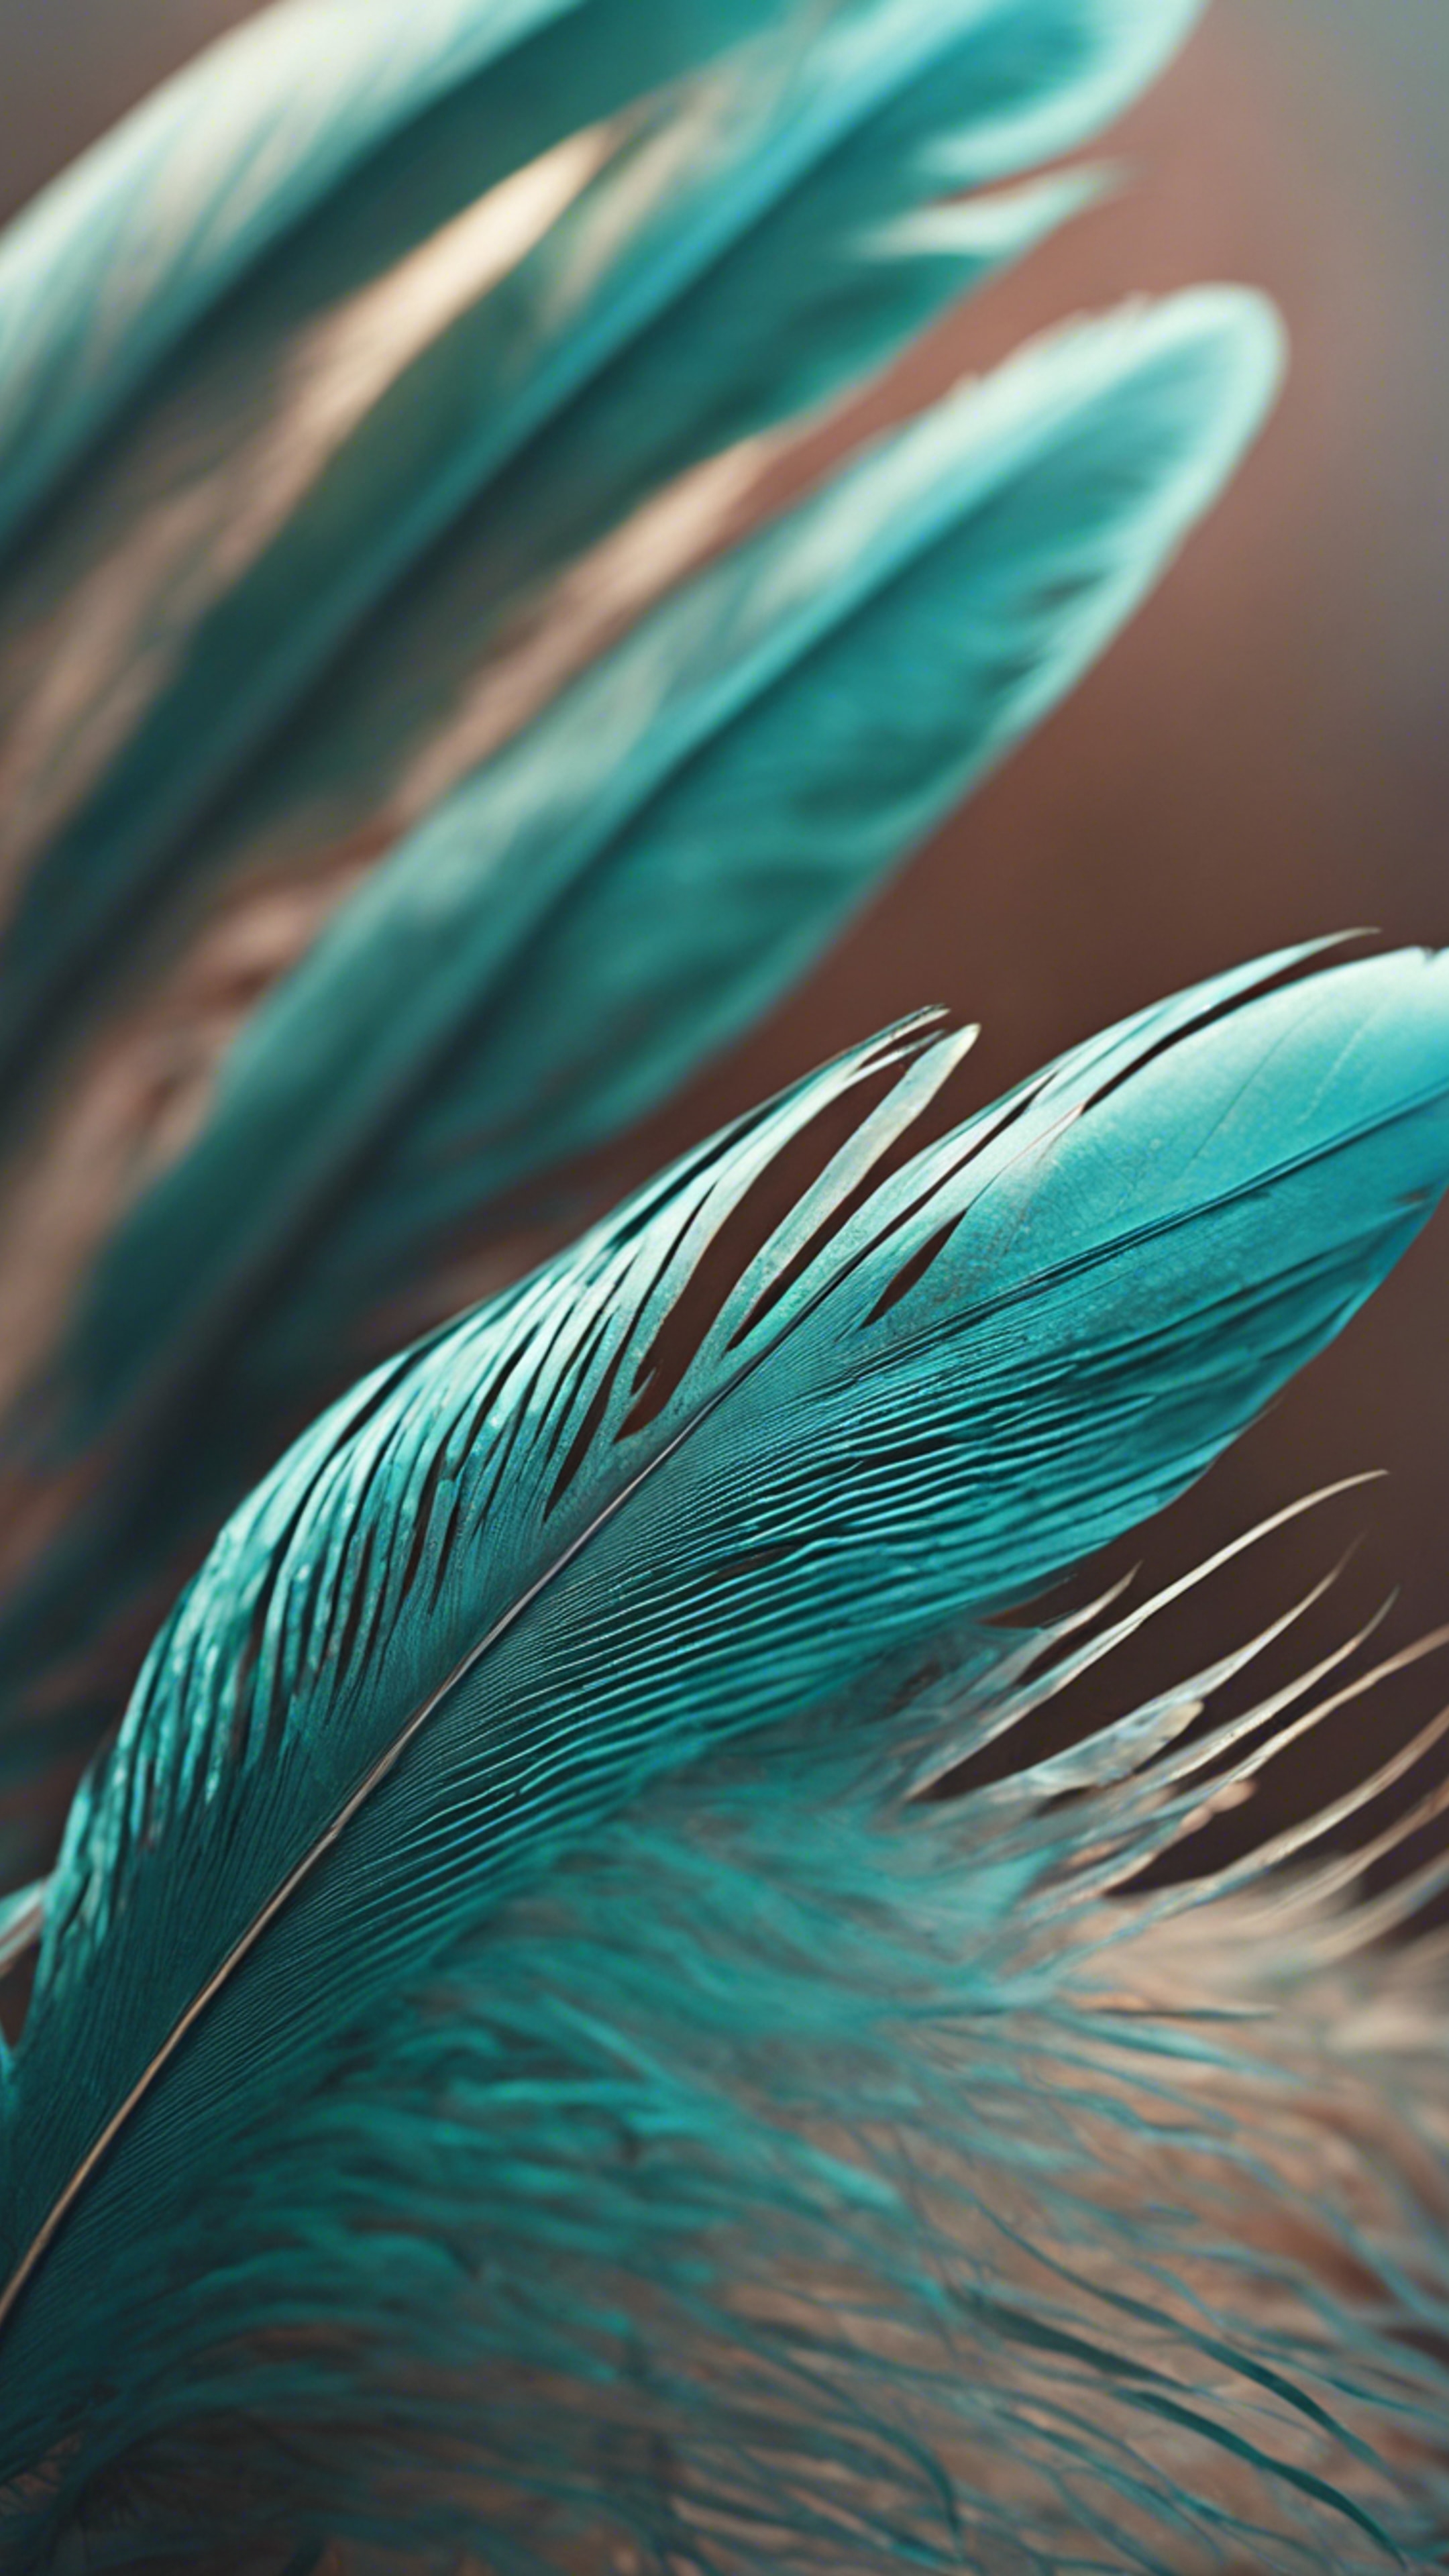 A close-up view of an exotic cool teal-colored birds' feather. Fond d'écran[44d0beeee9f542d4ae1e]